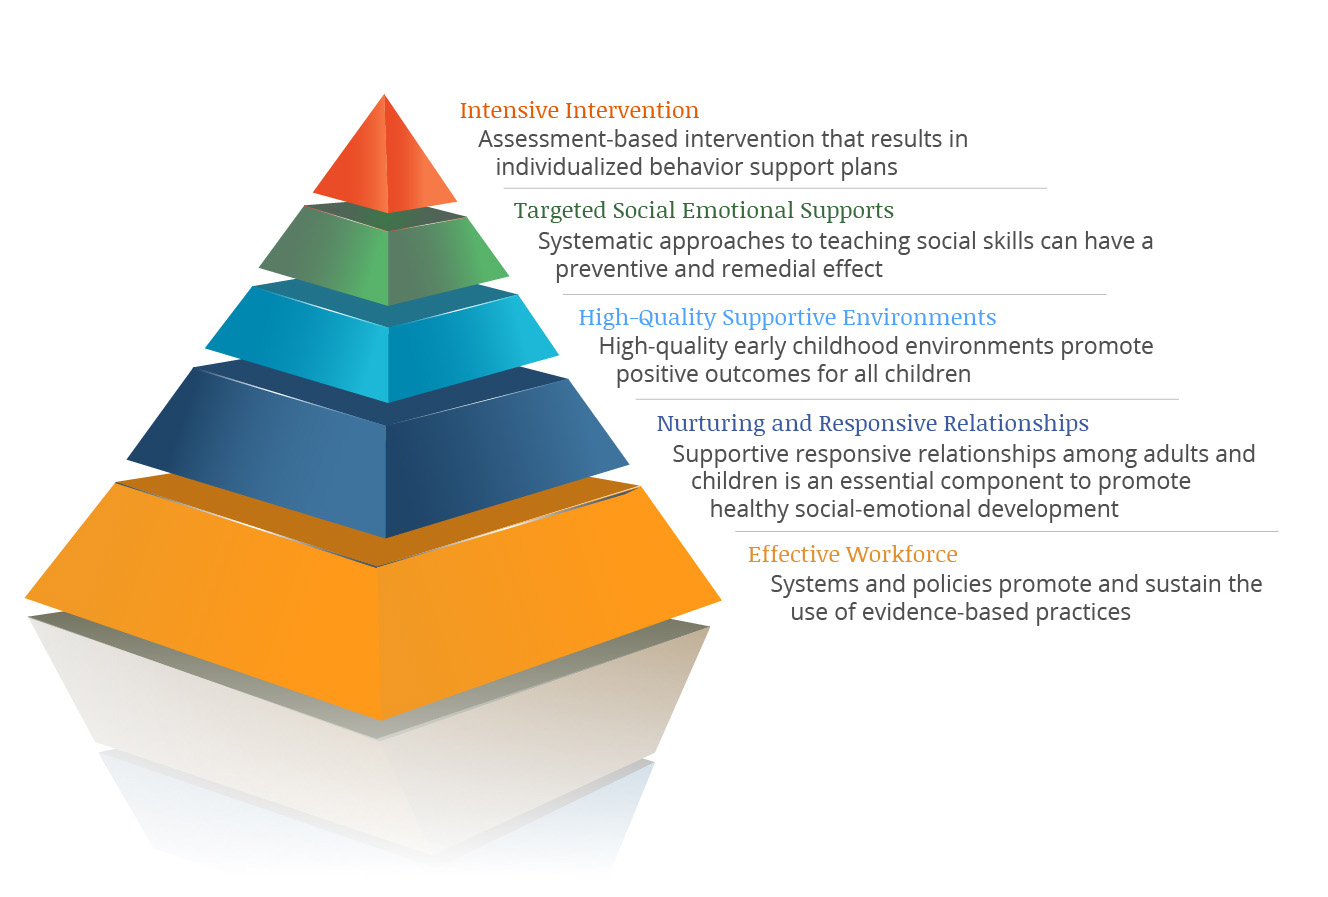 Visual pyramid model for foundations of supporting children's positive behavior in child-care and youth programs